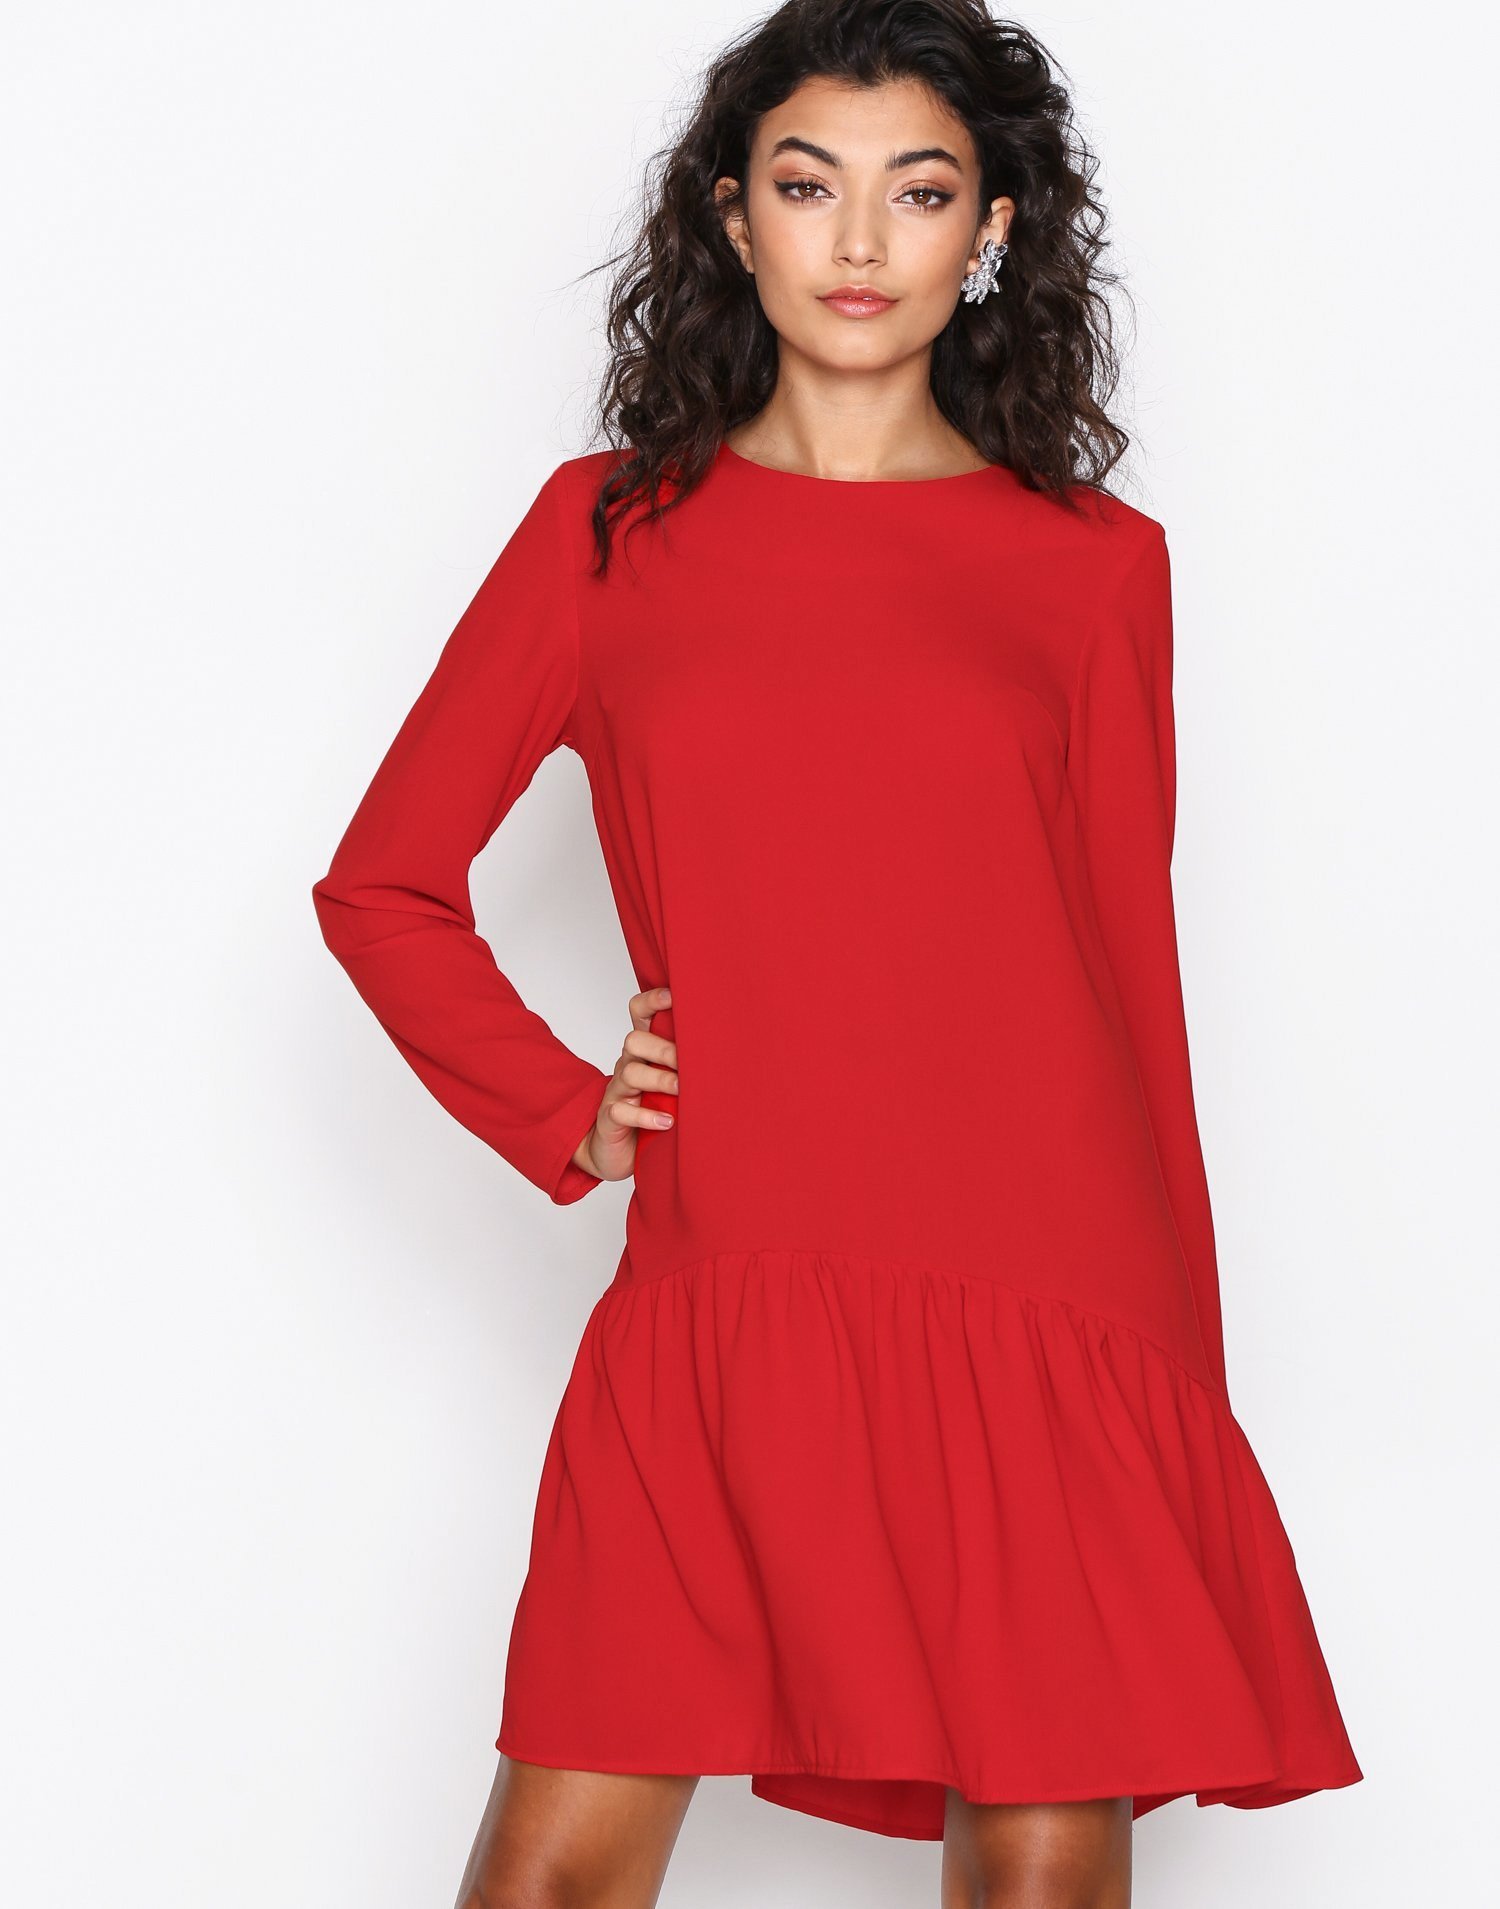 I Can Jive Dress - Nly Trend - Red - Dresses - Clothing - Women - Nelly.com